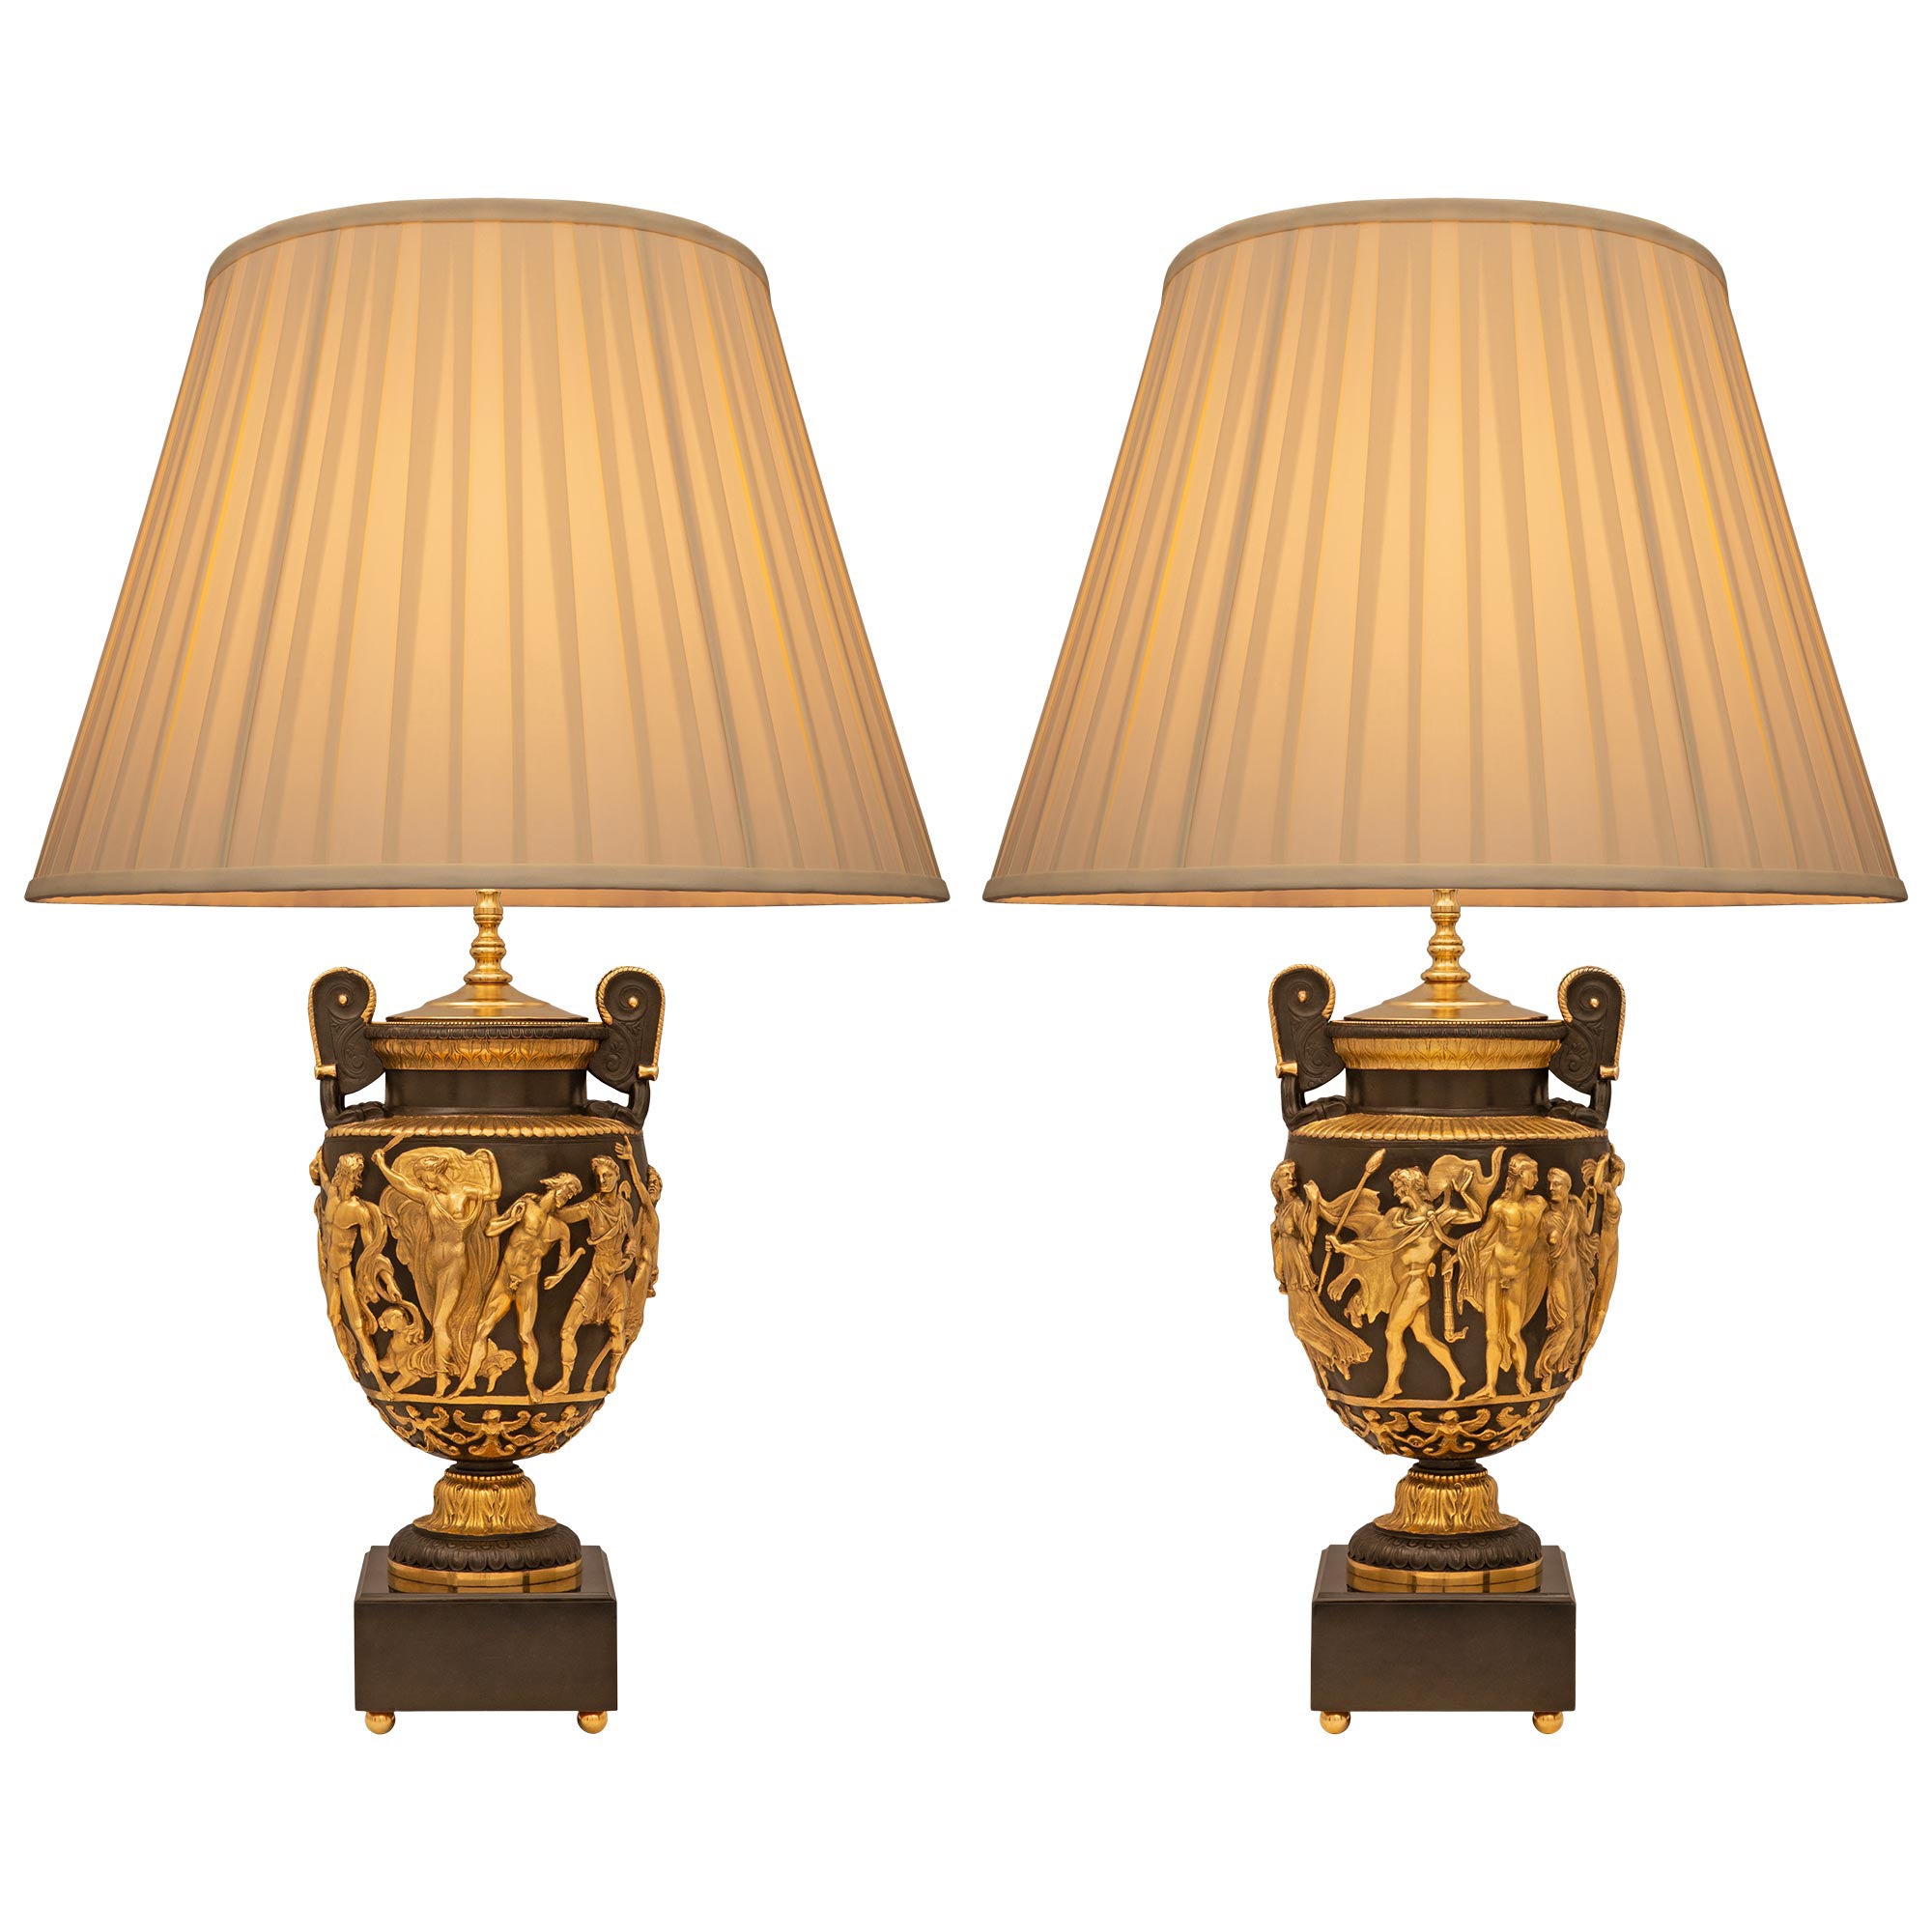 Pair Of French 19th Century Grand Tour Period Bronze, Ormolu, And Marble Lamps